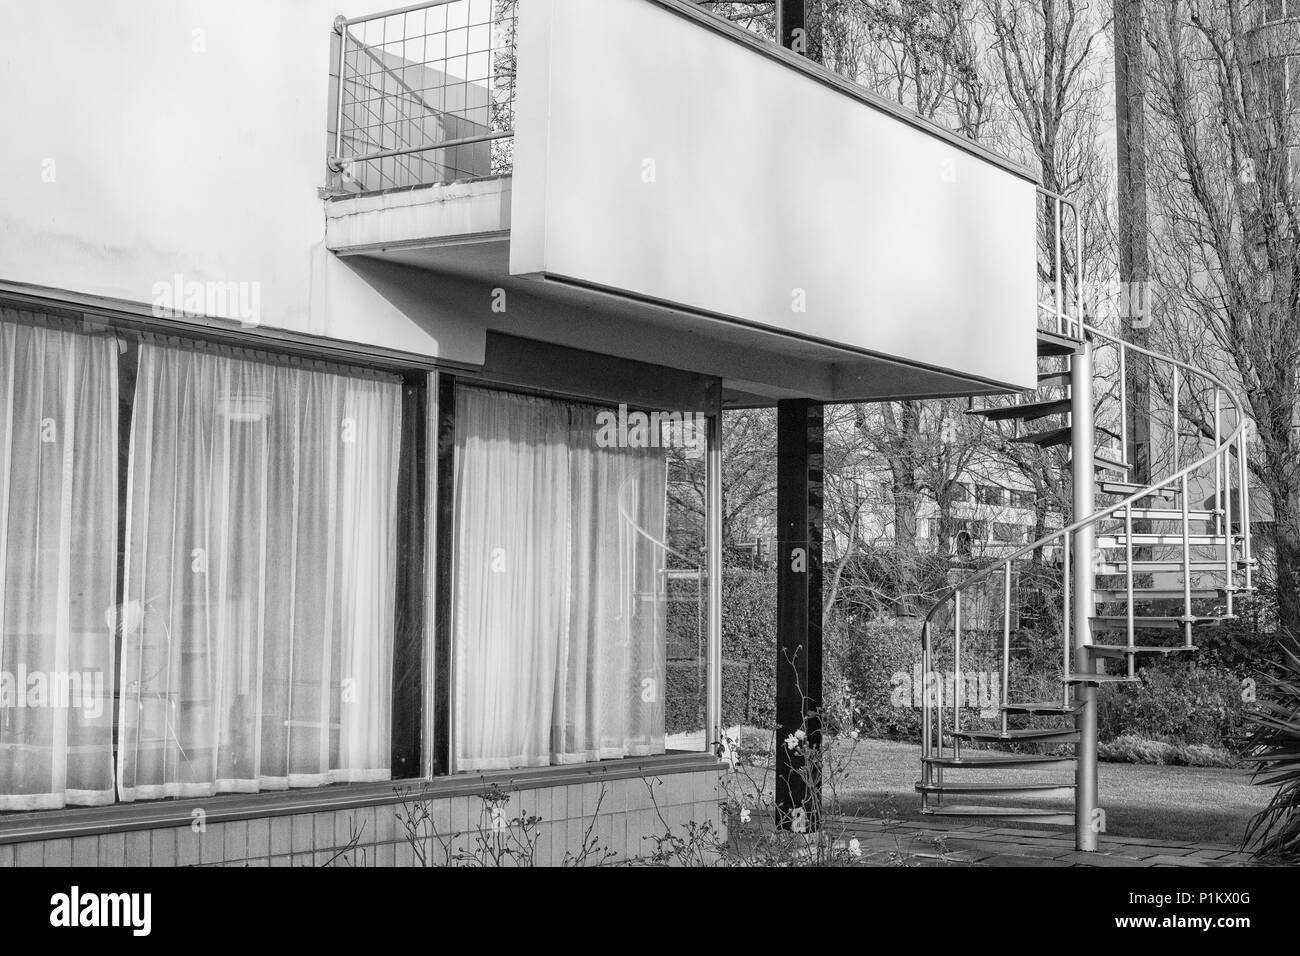 The Sonneveld House Museum in Rotterdam, Netherlands. This 1930s house was built in the new objectivity architectural style and is now a museum. In bl Stock Photo